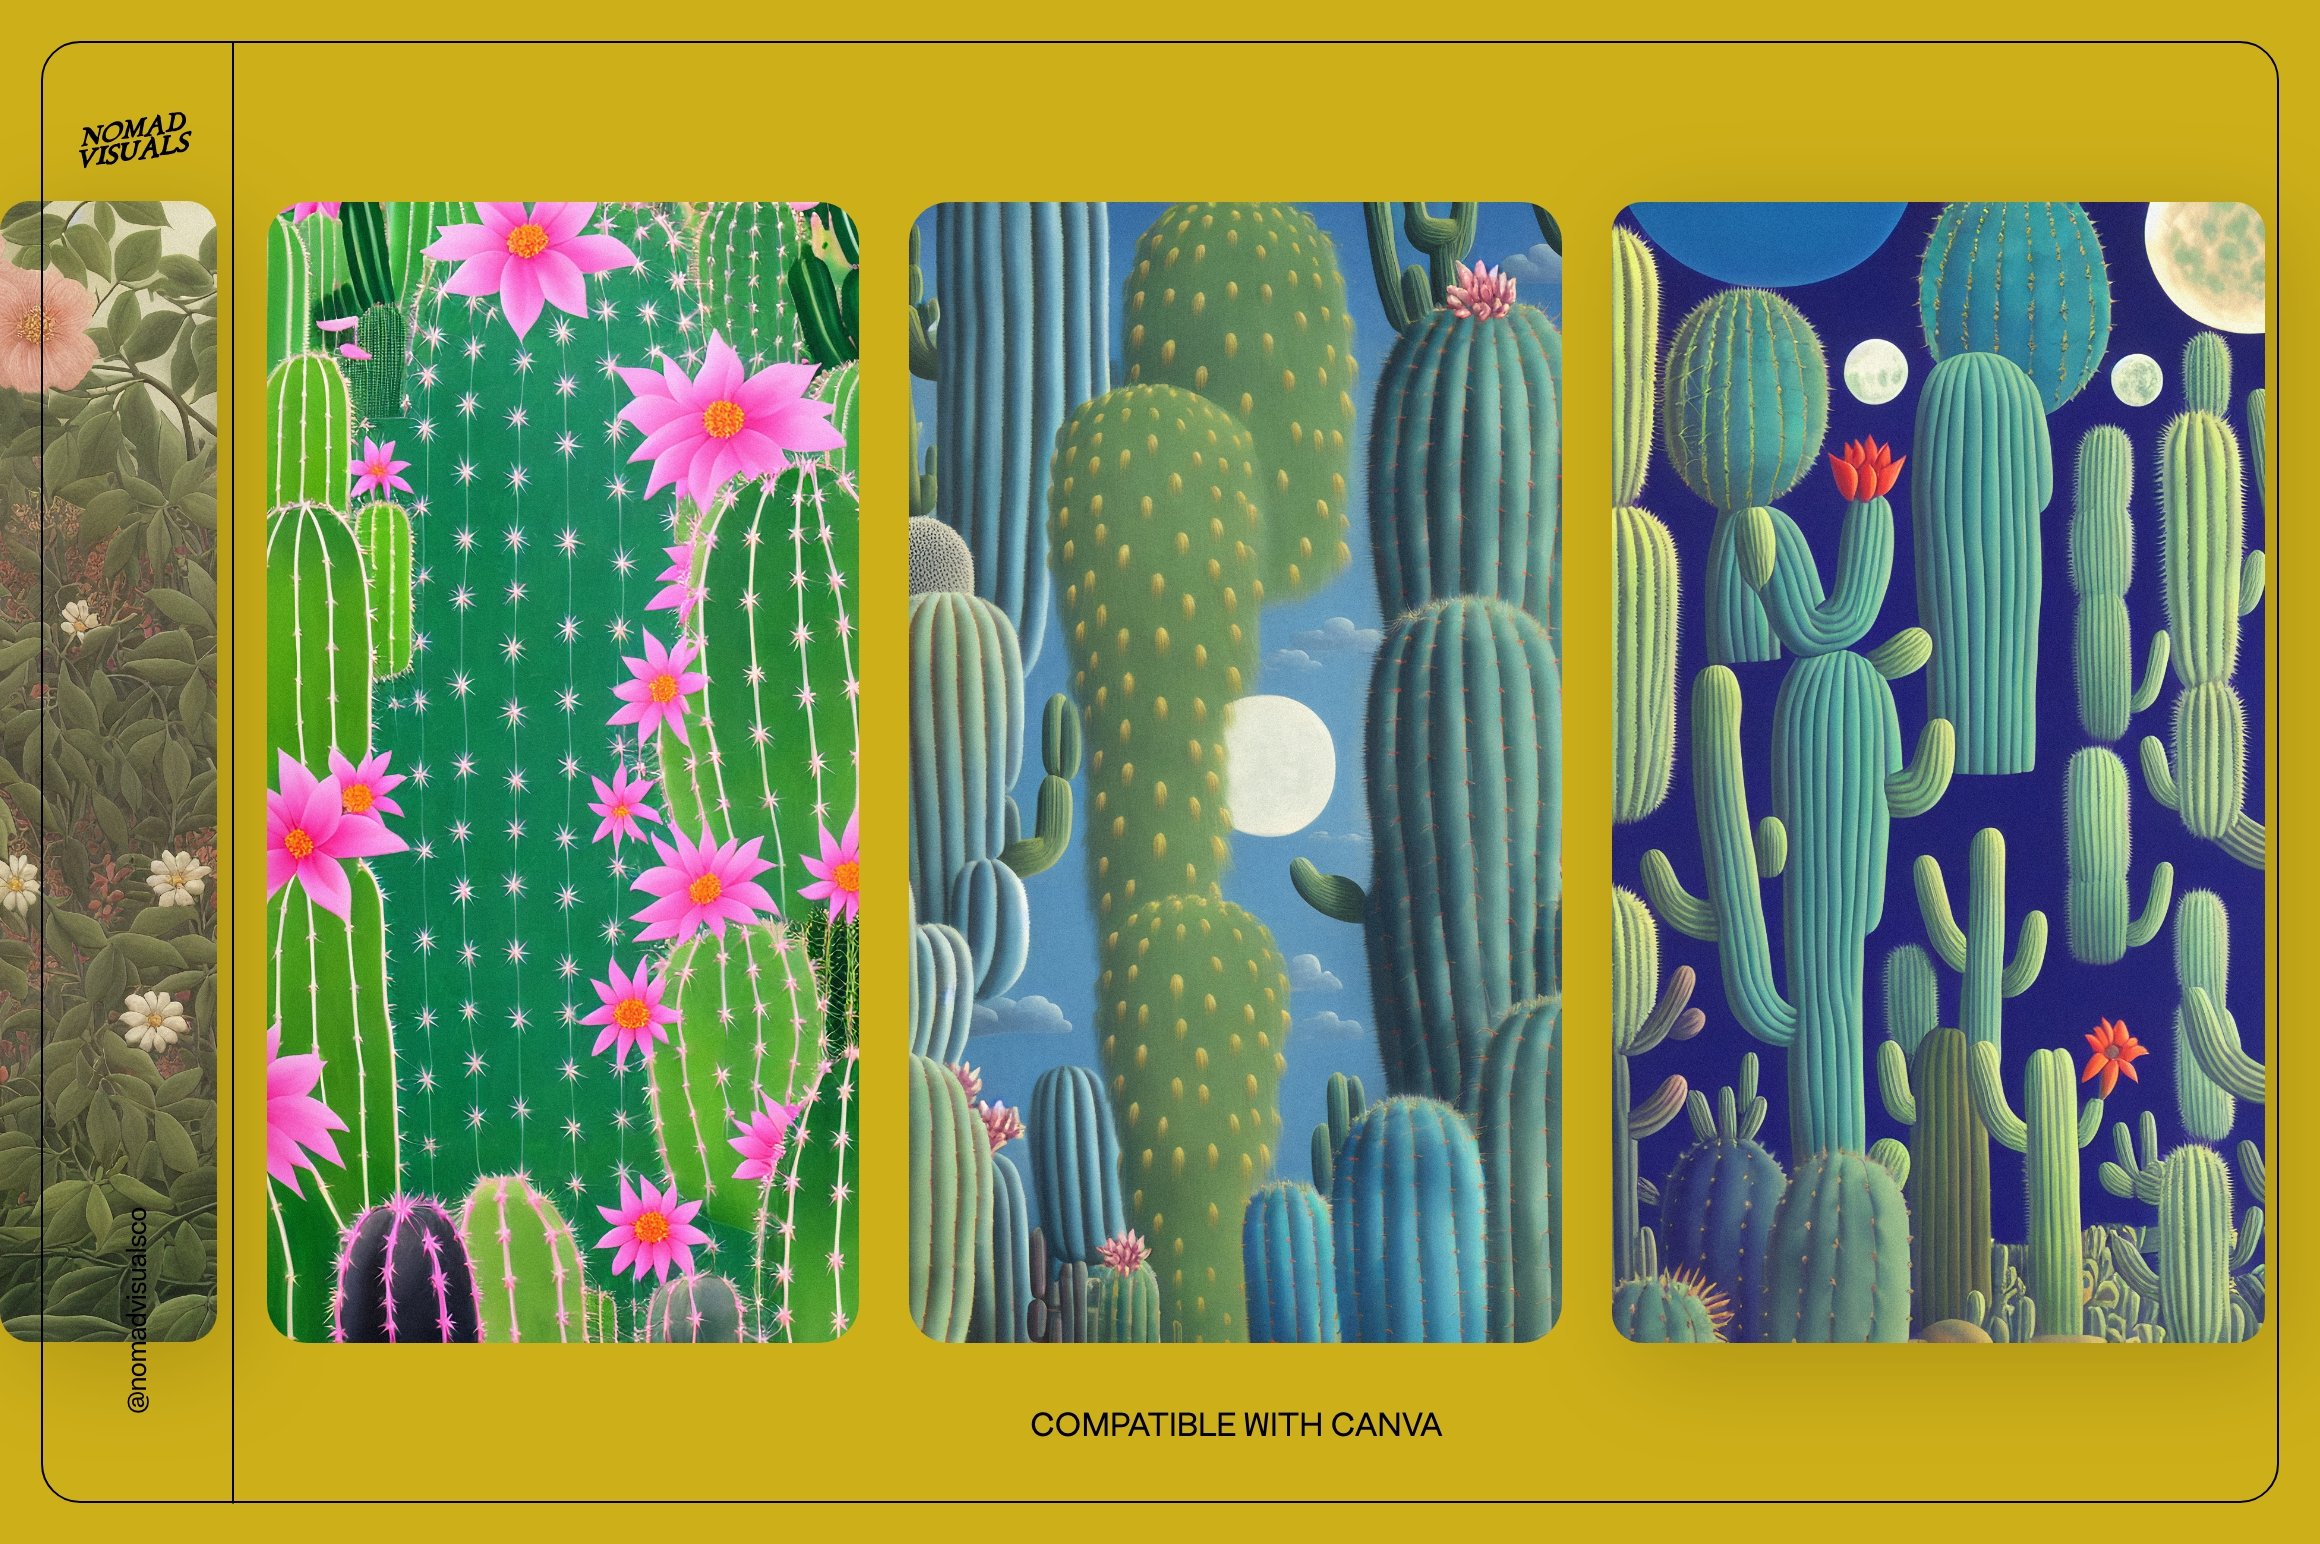 Series of three images showing different cactus designs.